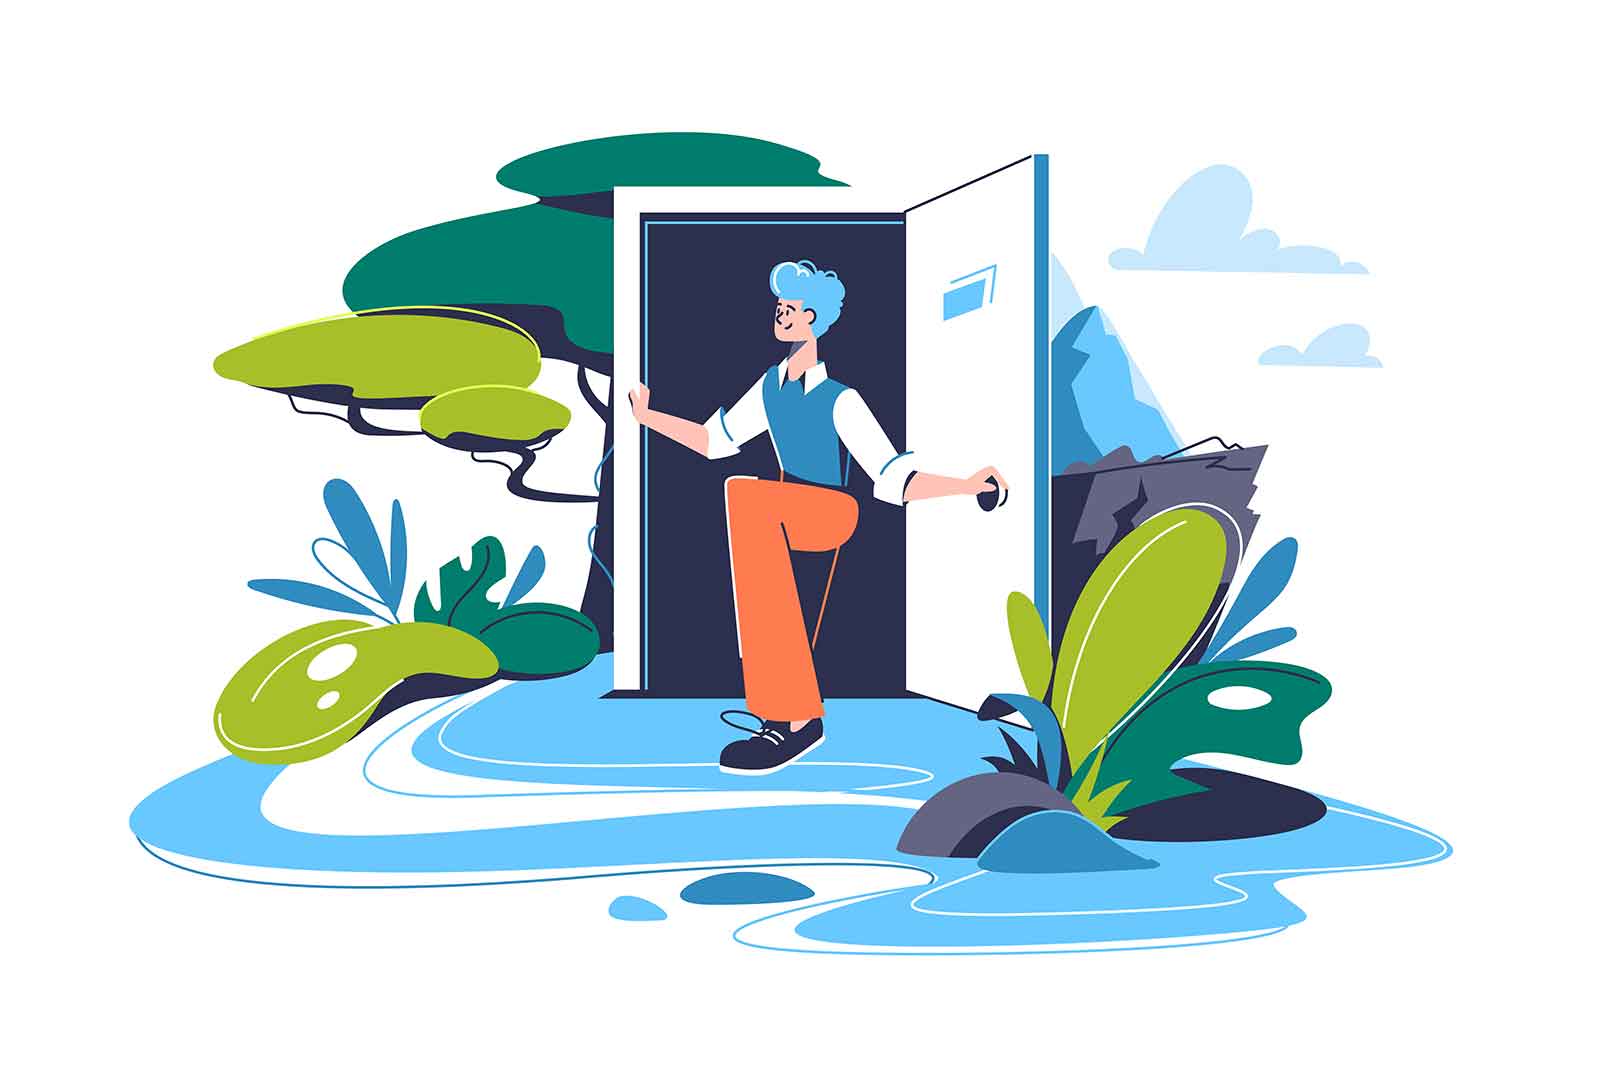 Man walks out of door into nature, vector illustration. Access to nature in modern world, concept.